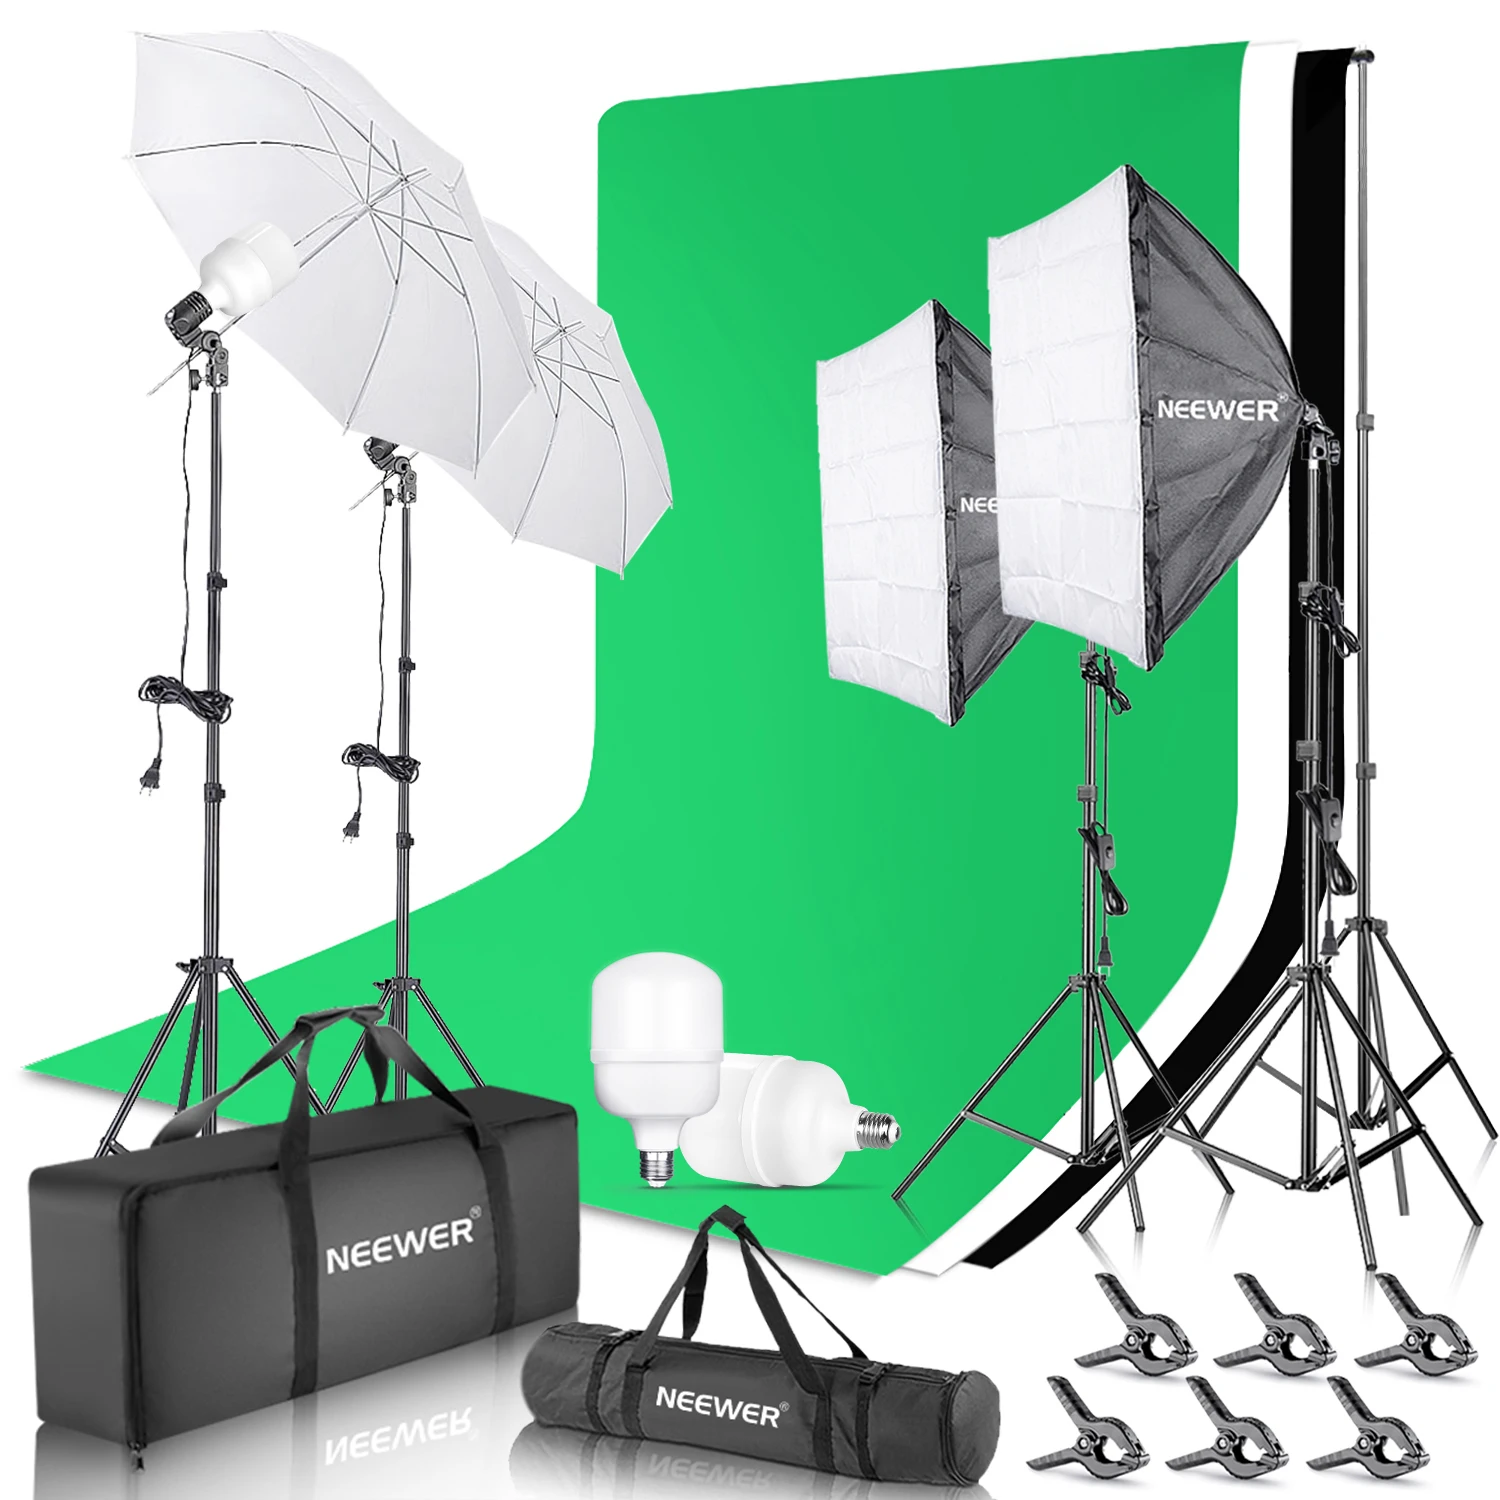 

Neewer 8.5x10ft Backdrop Stand Support Kit with 6x9ft Background, 900W 5500K 24-inch LED Softbox and Umbrellas Continuous Lighti